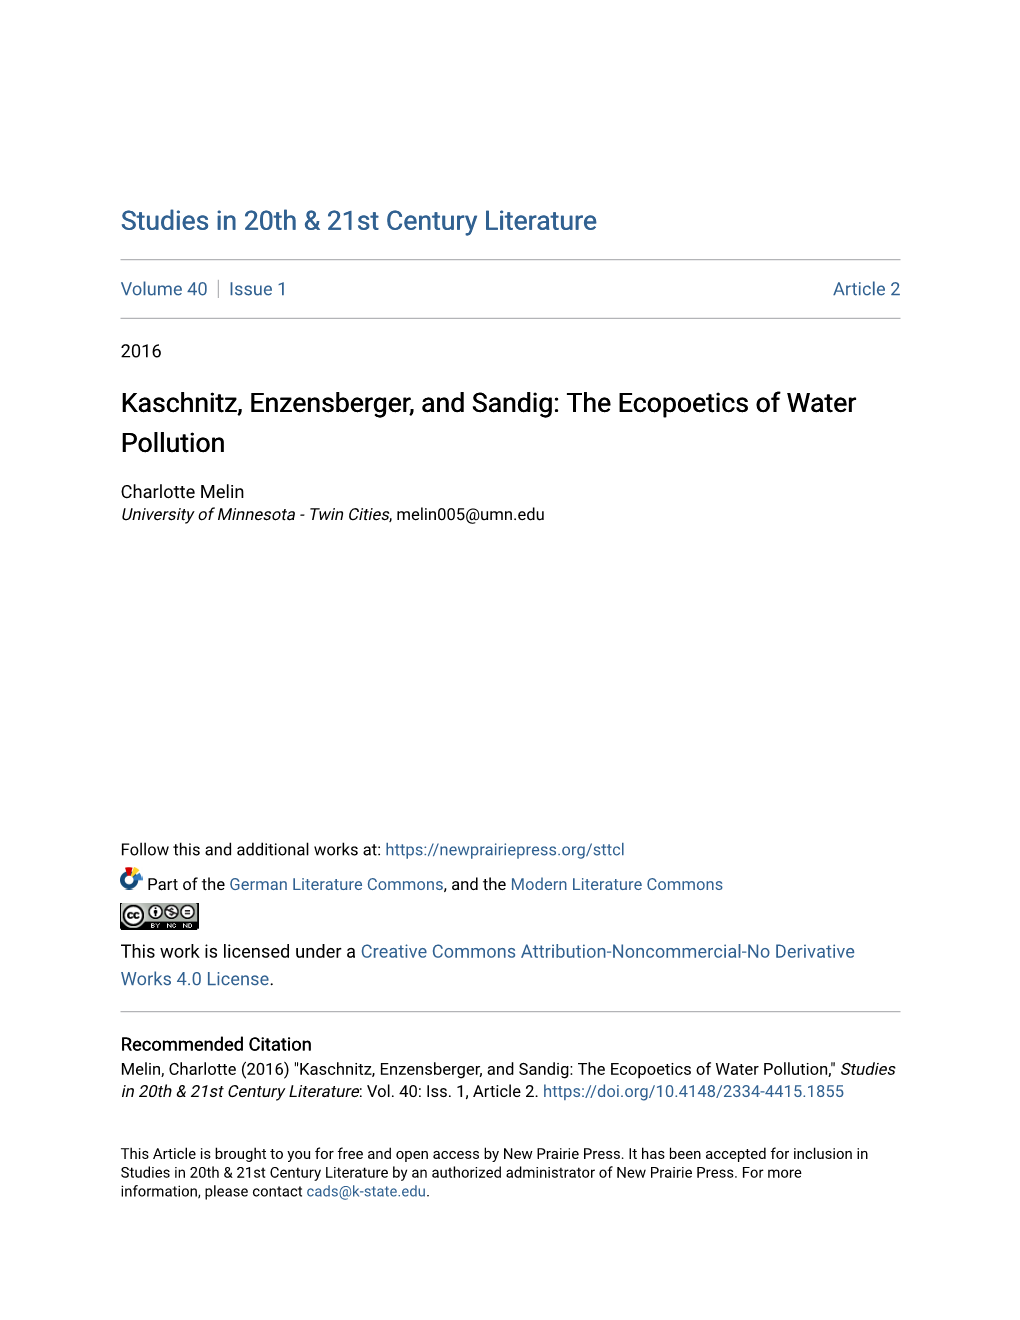 The Ecopoetics of Water Pollution